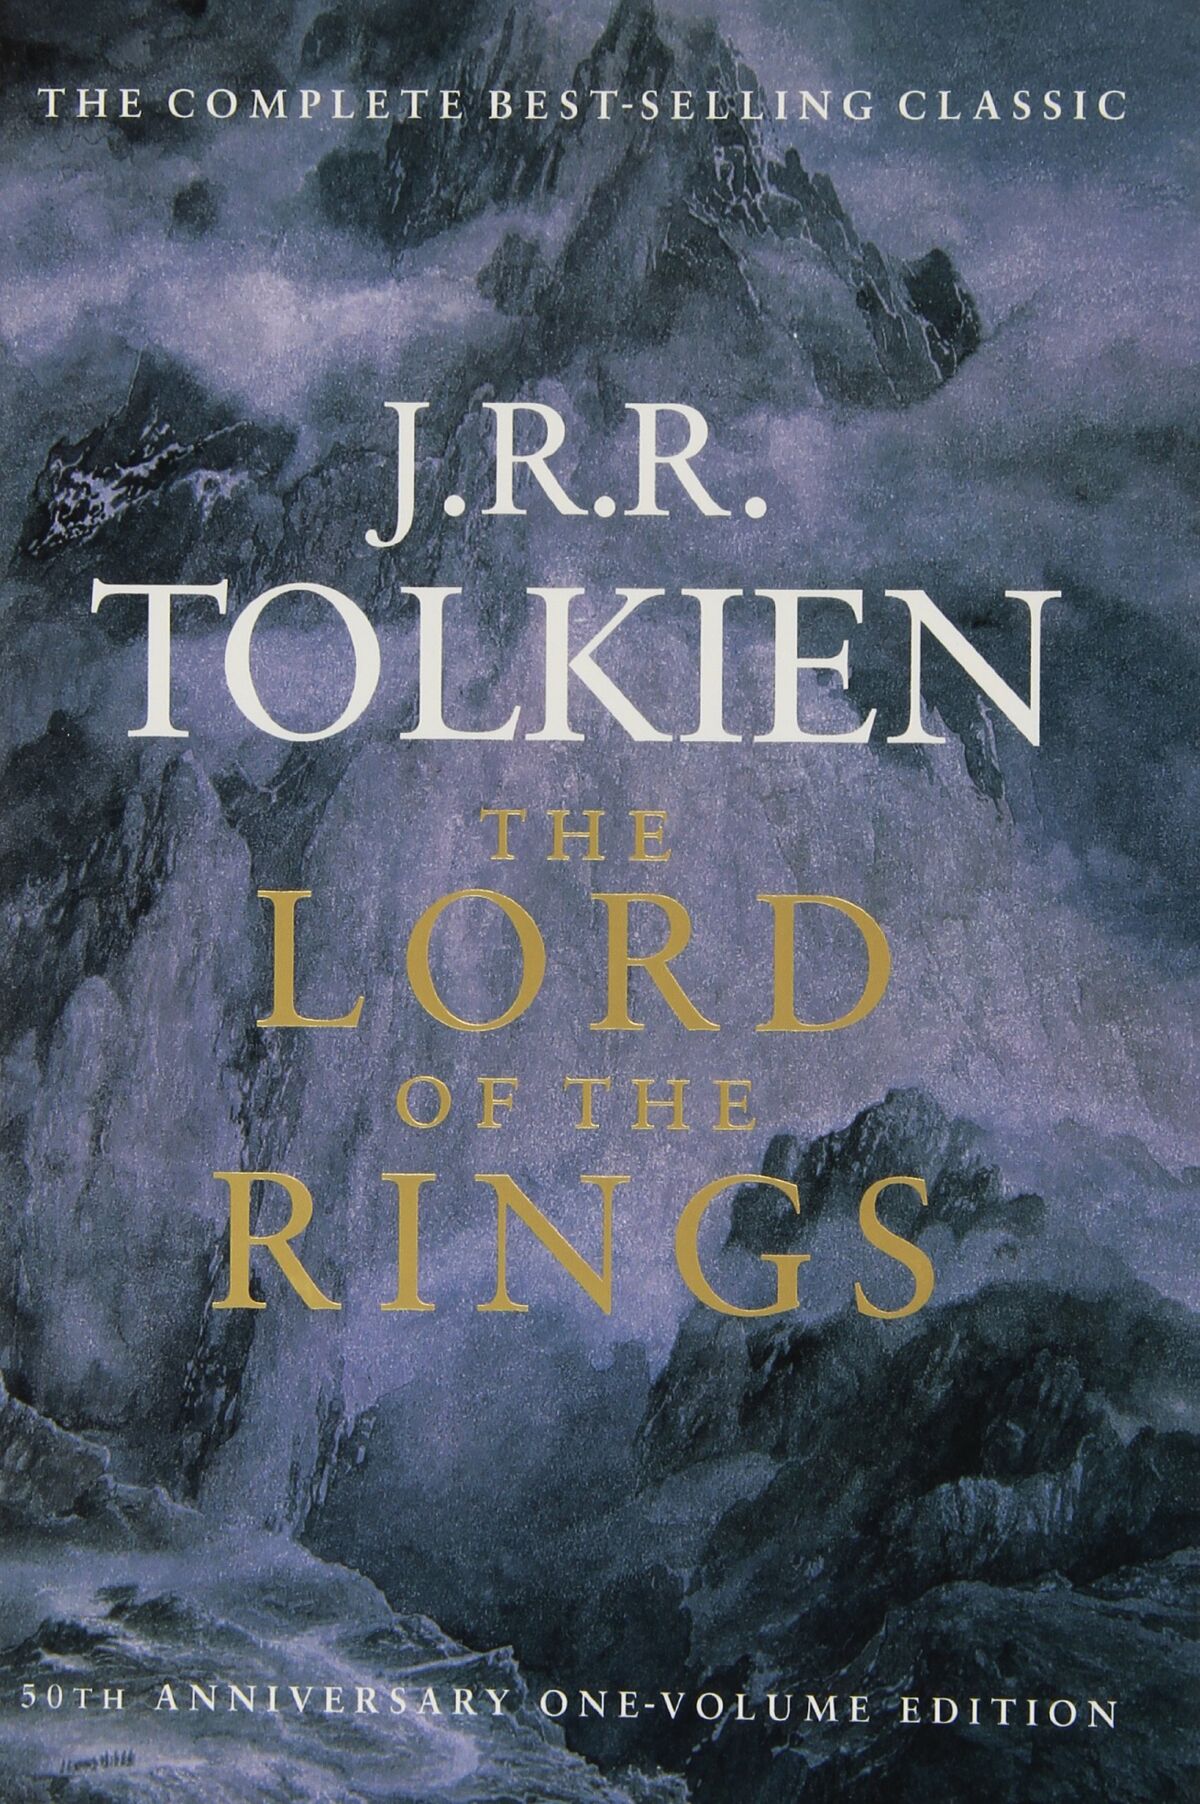 The Lord of the Rings | The One Wiki to Rule Them All | Fandom